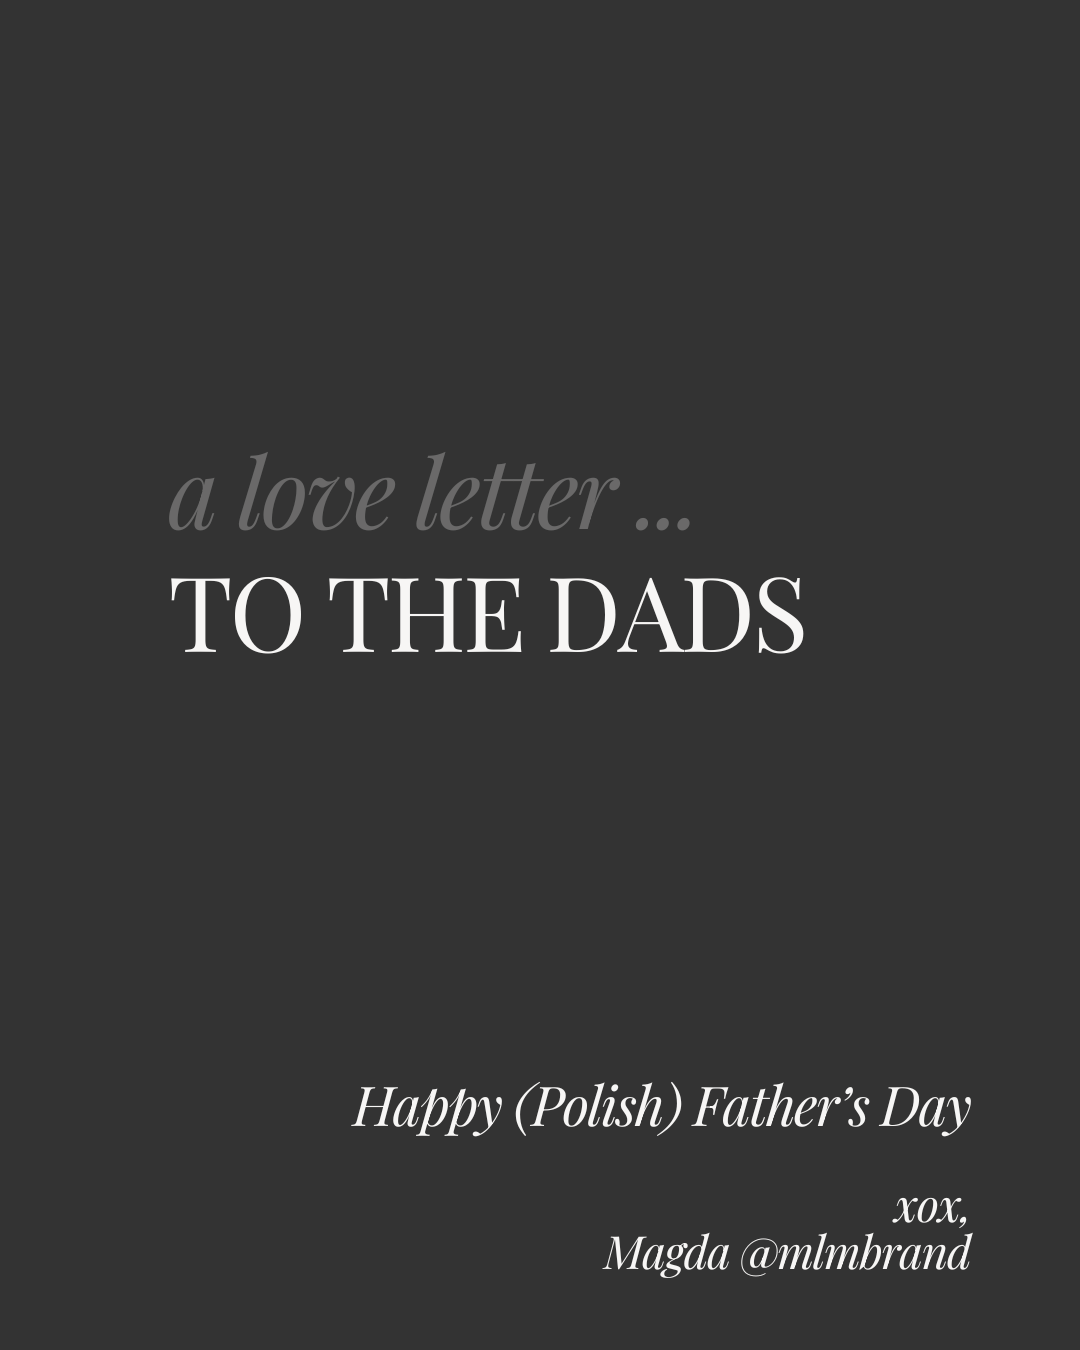 A Love Letter To The Dads ...